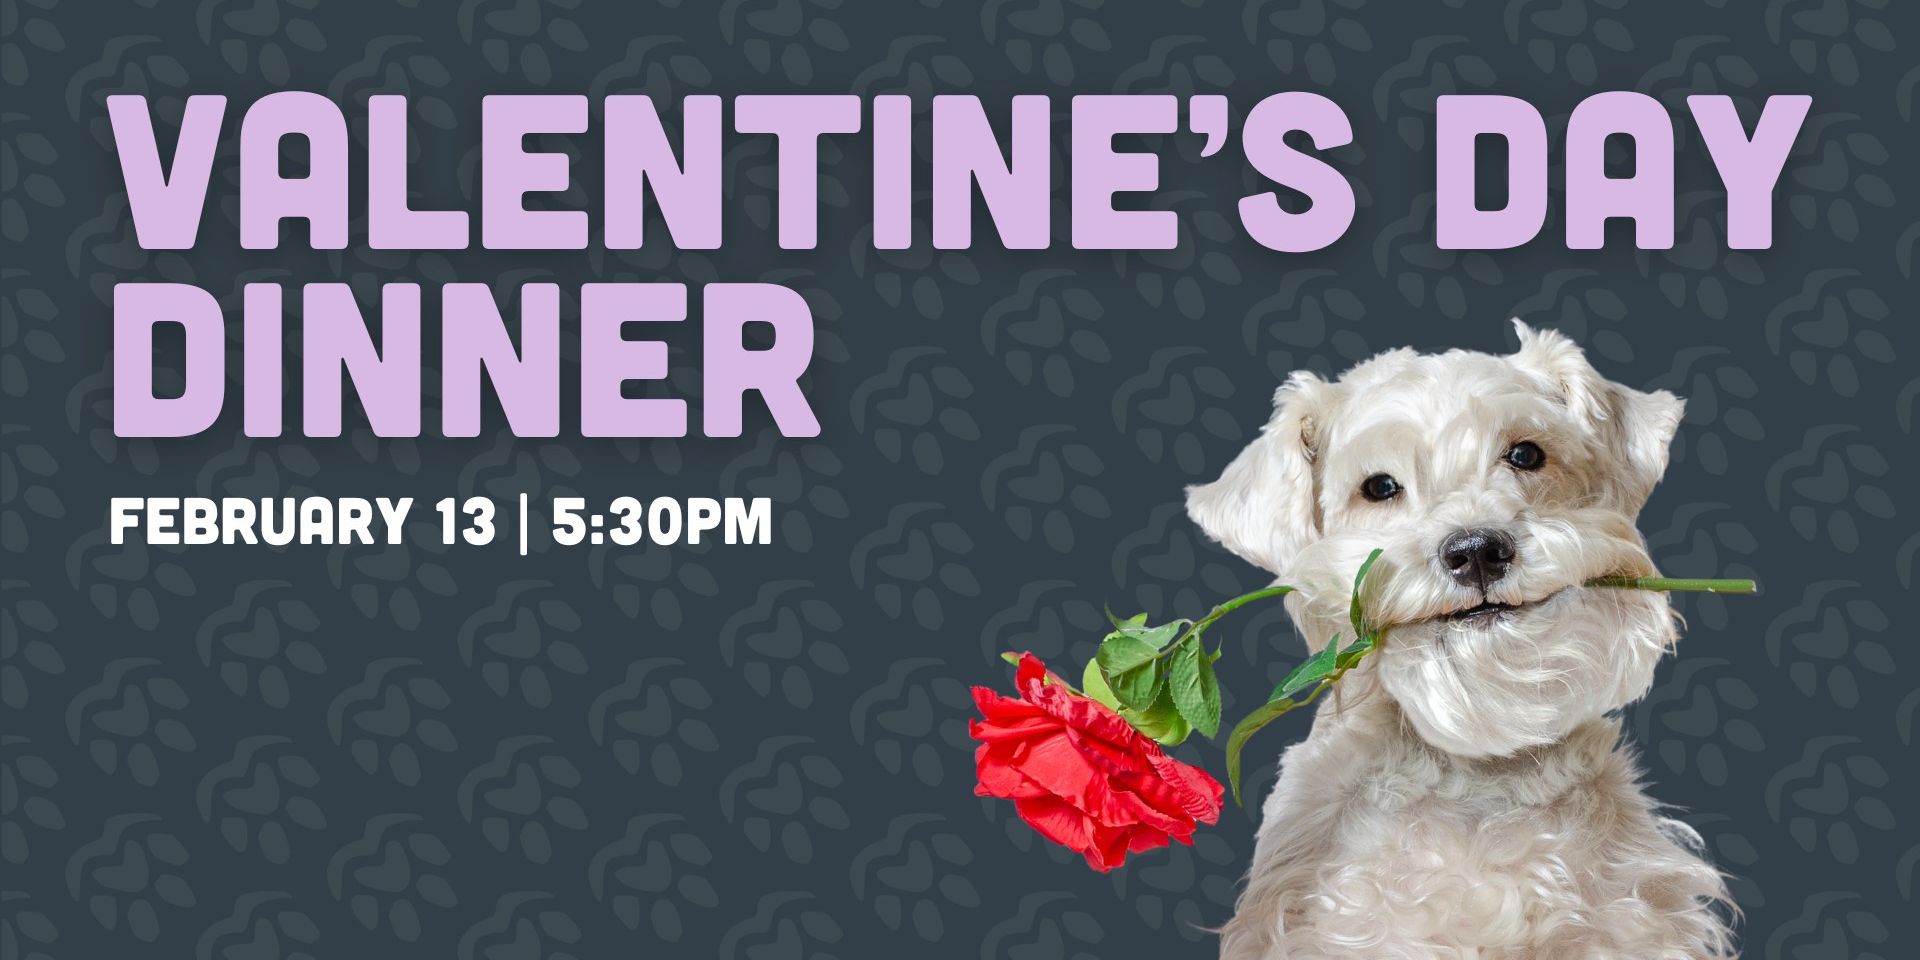 Valentine's Day Dinner at Paws & Pints promotional image